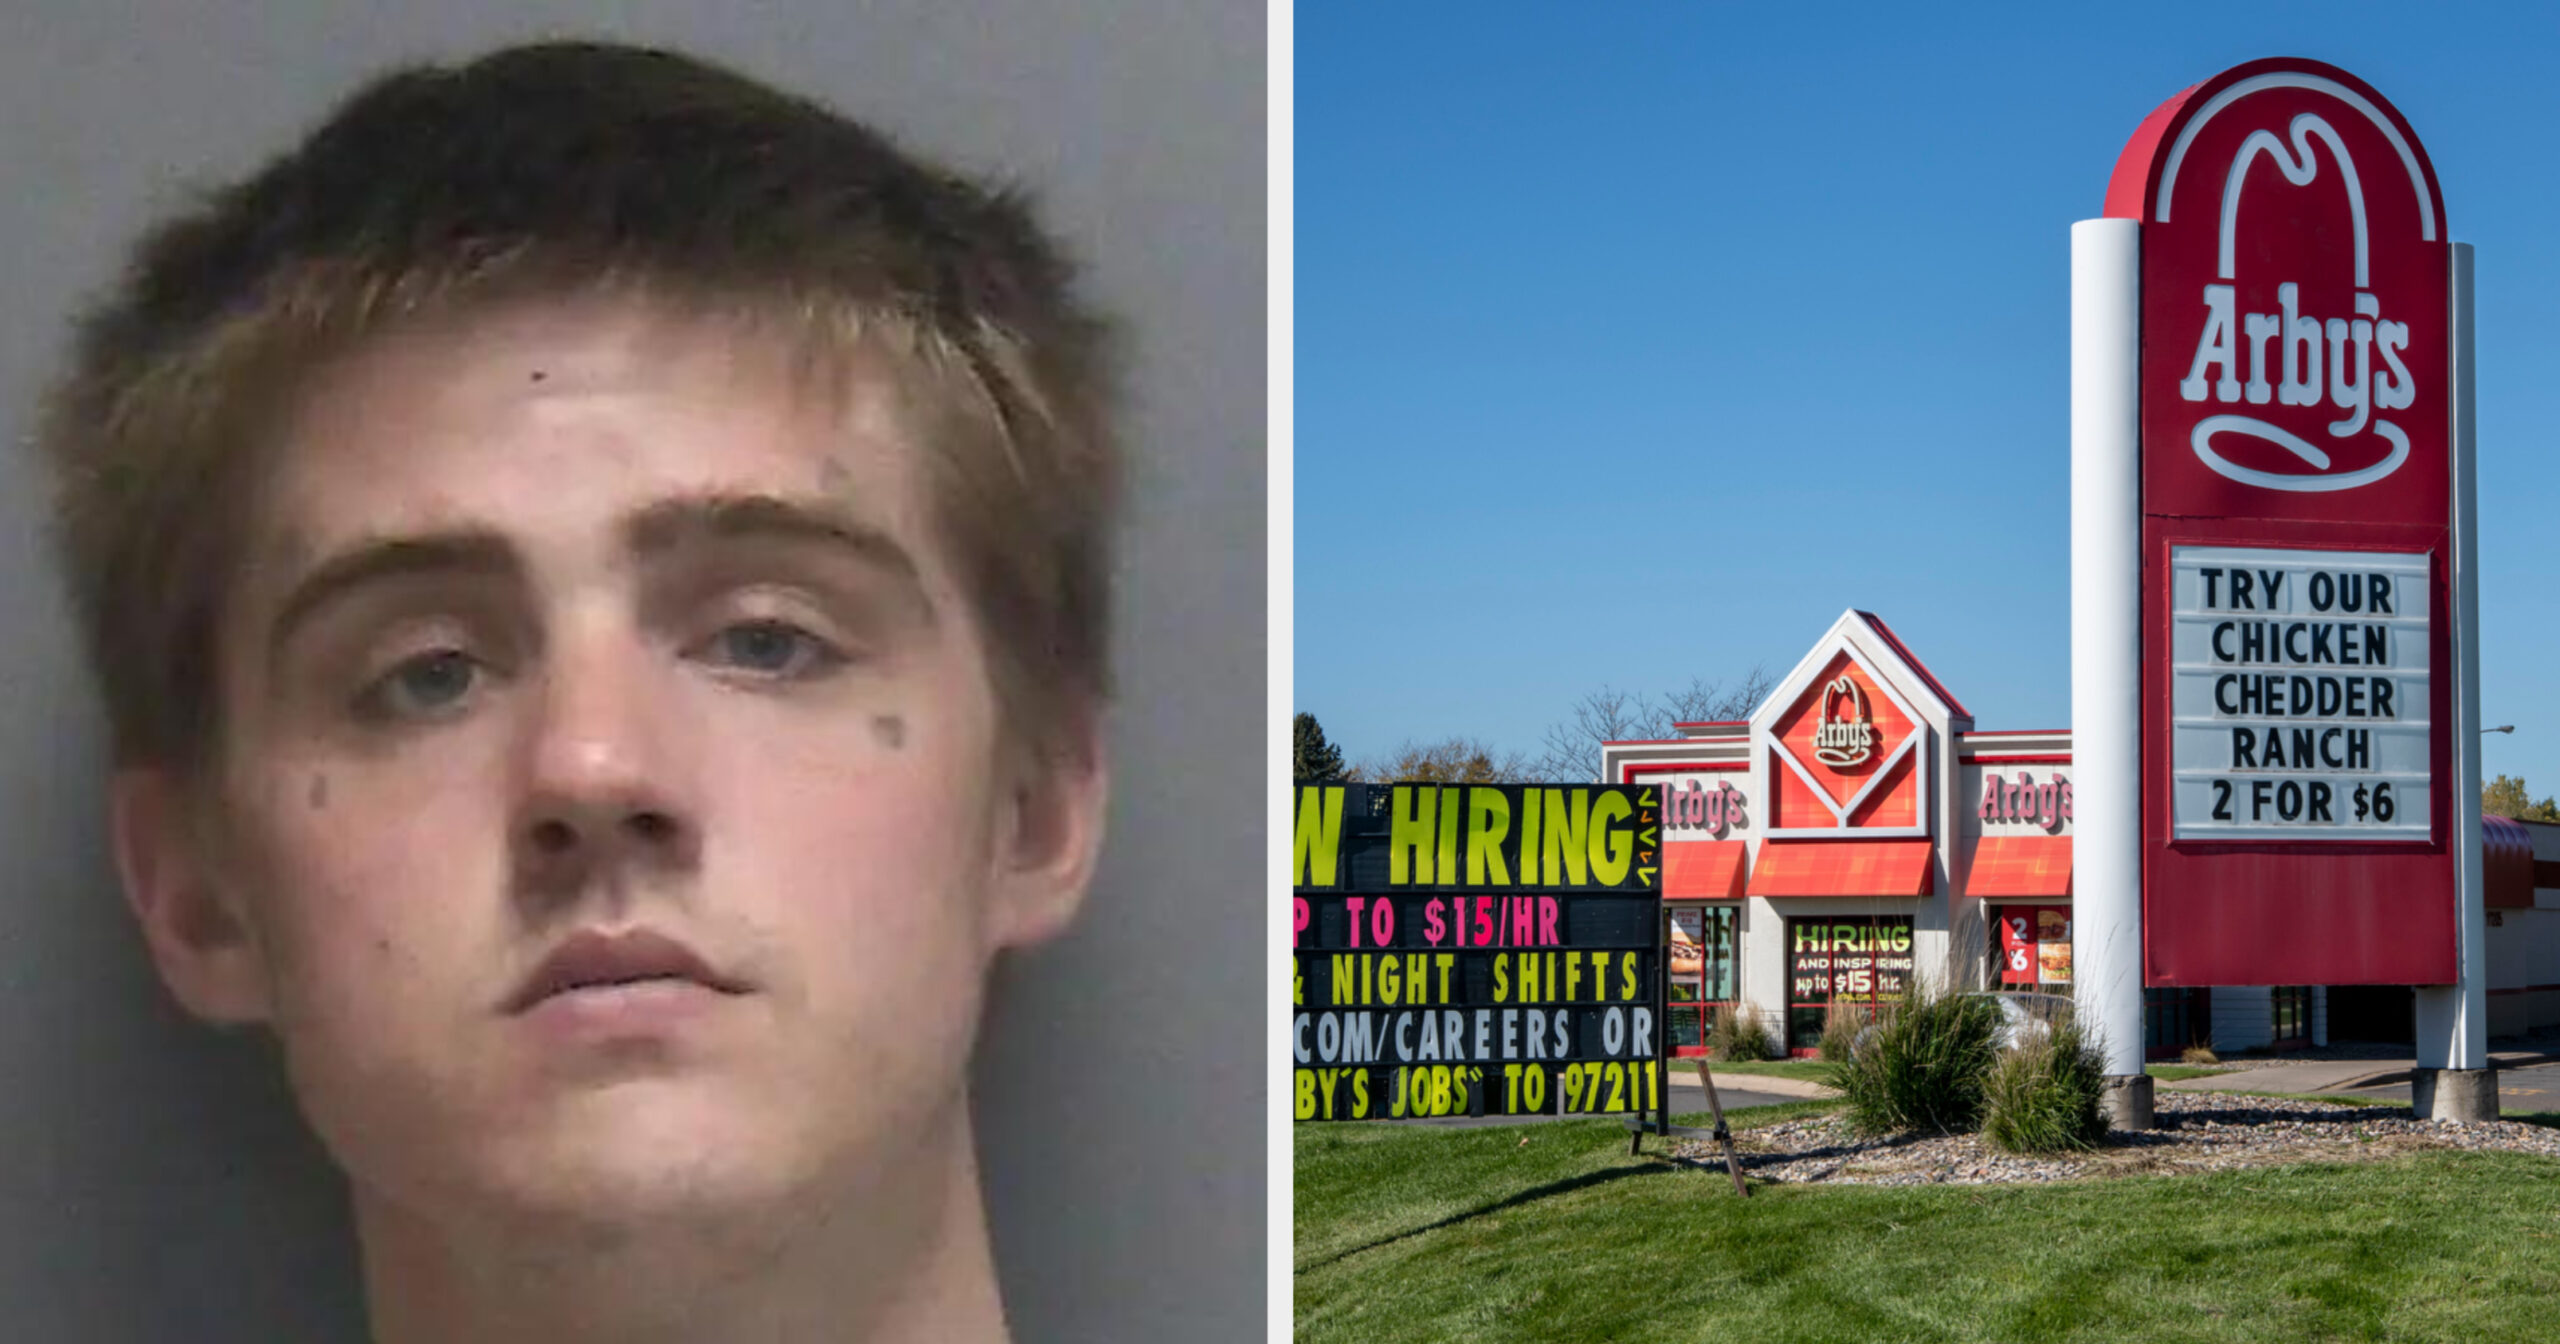 Man Attempts to Rob Arby’s With BB Gun and Fails Miserably